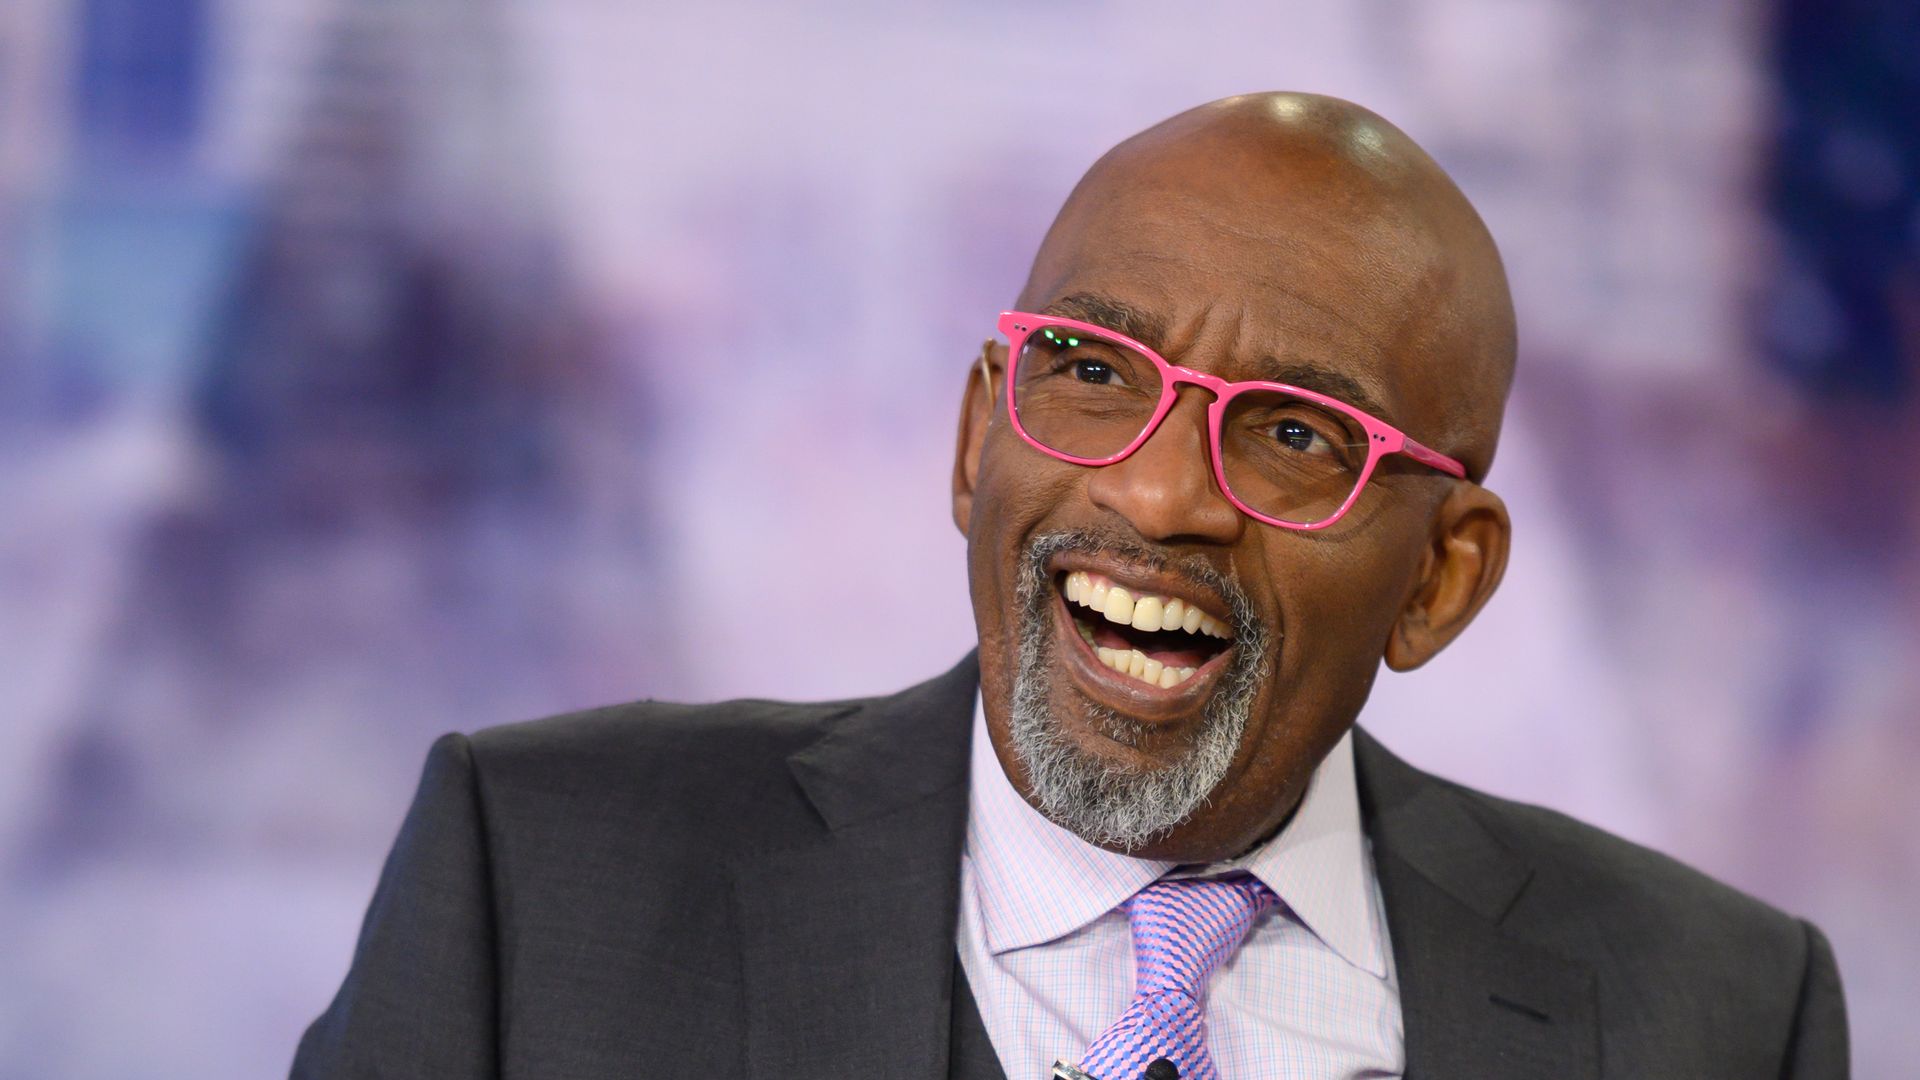 TODAY -- Pictured: Al Roker on Monday, February 24, 2020